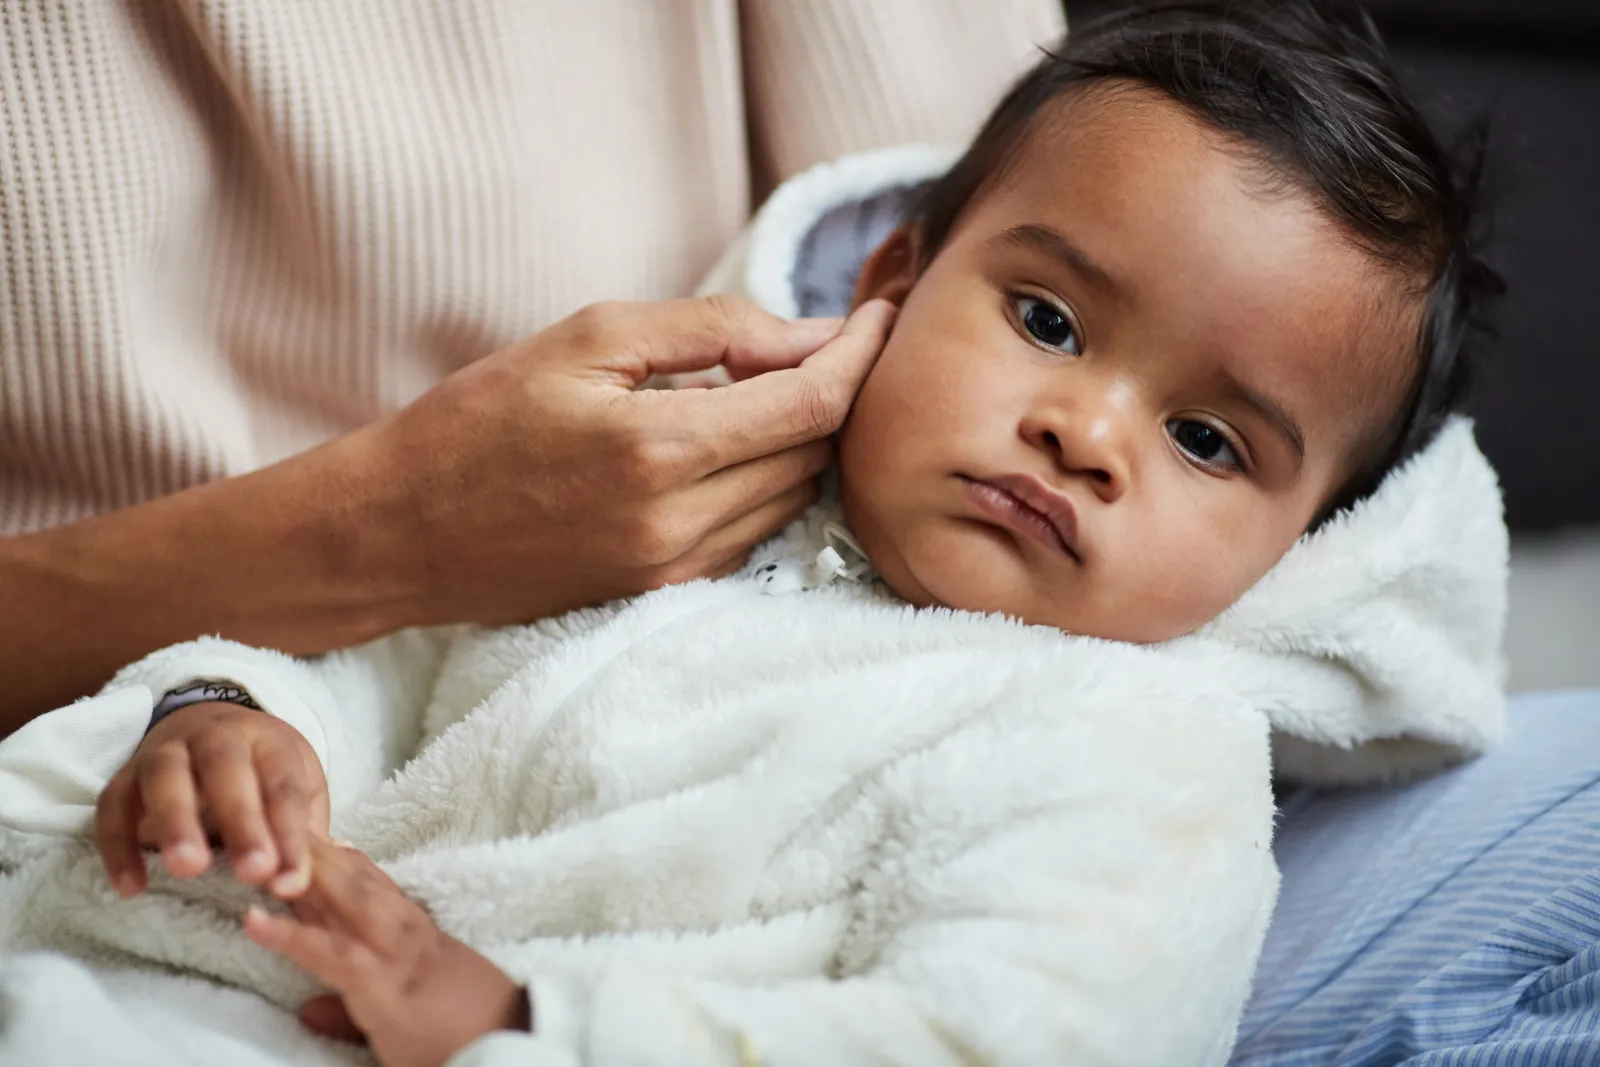 Recurrent Ear Infections in Children: When Is It Time to Get Tubes? 